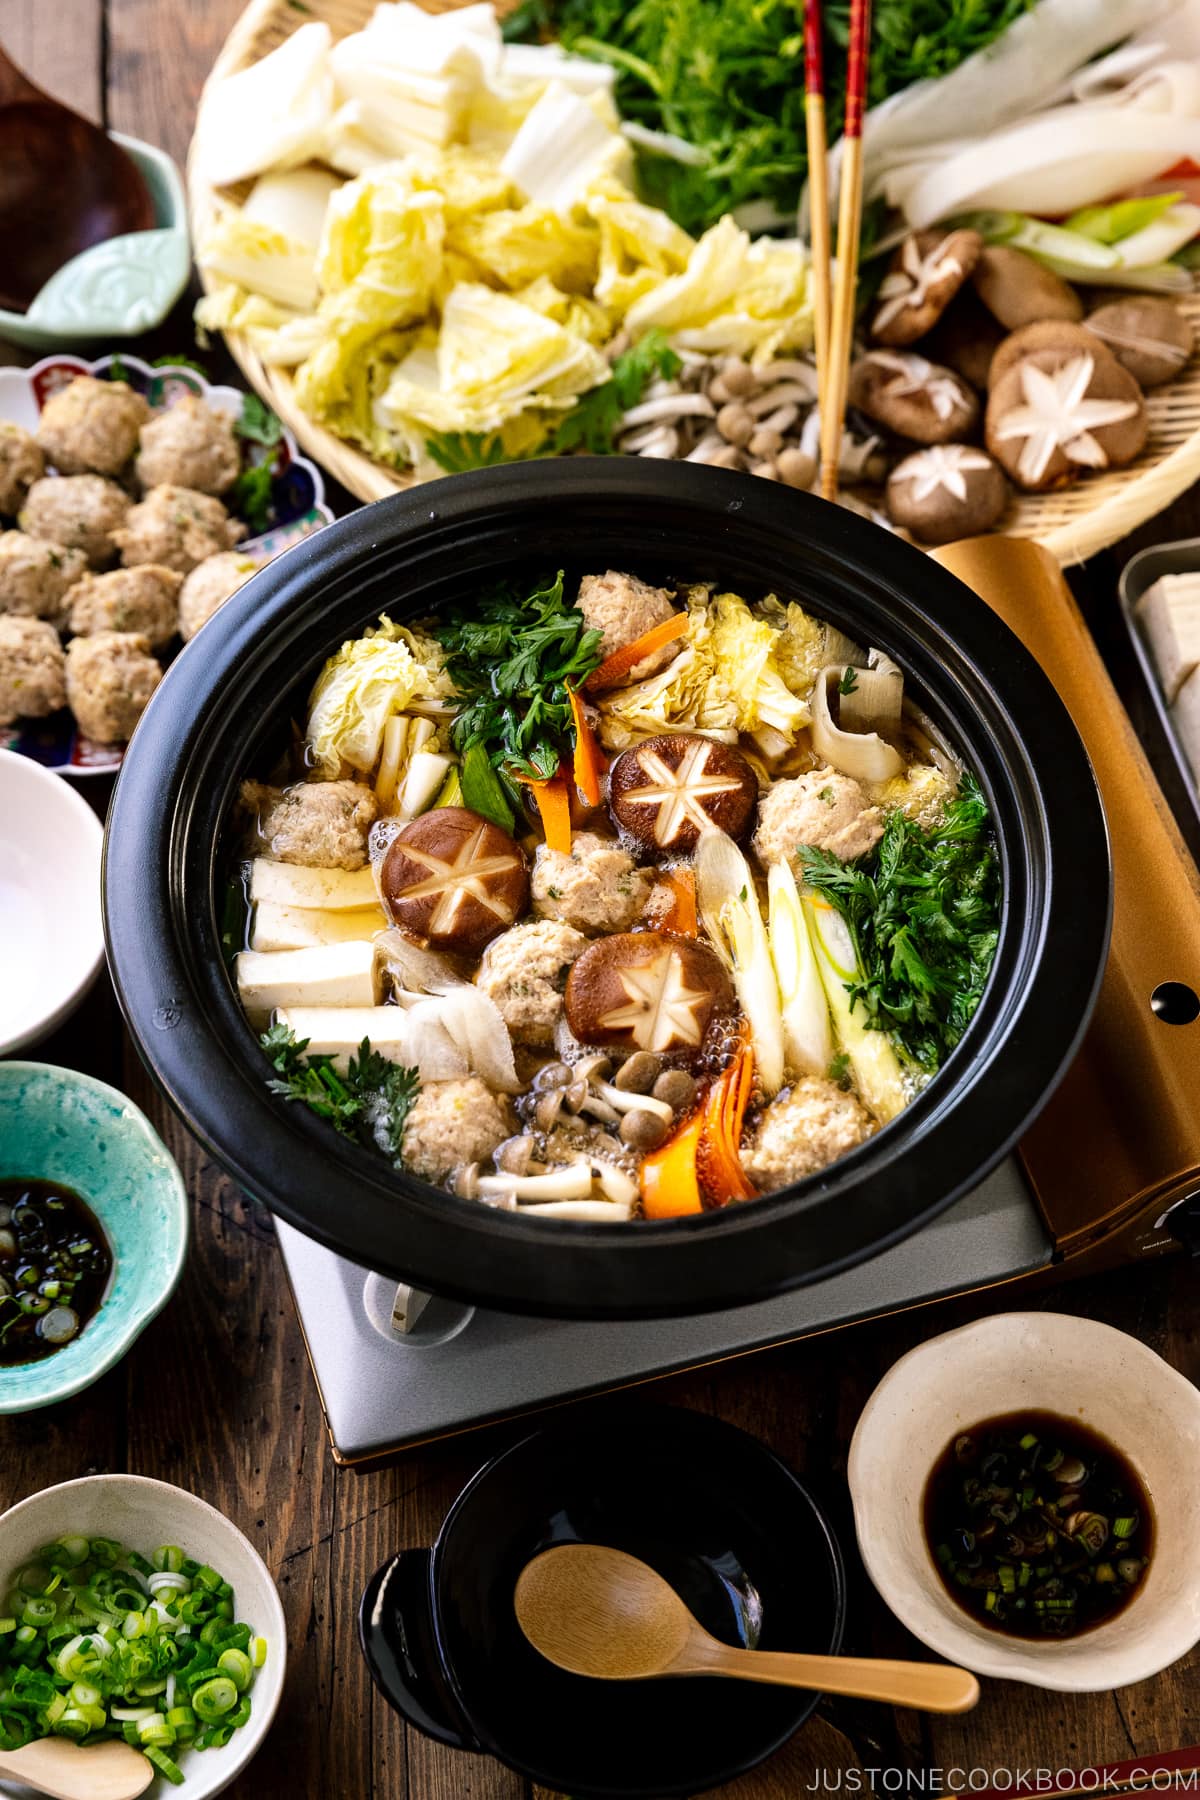 A Japanese clay pot simmering chicken meatballs, tofu, mushrooms, and various vegetables in a savory dashi broth.